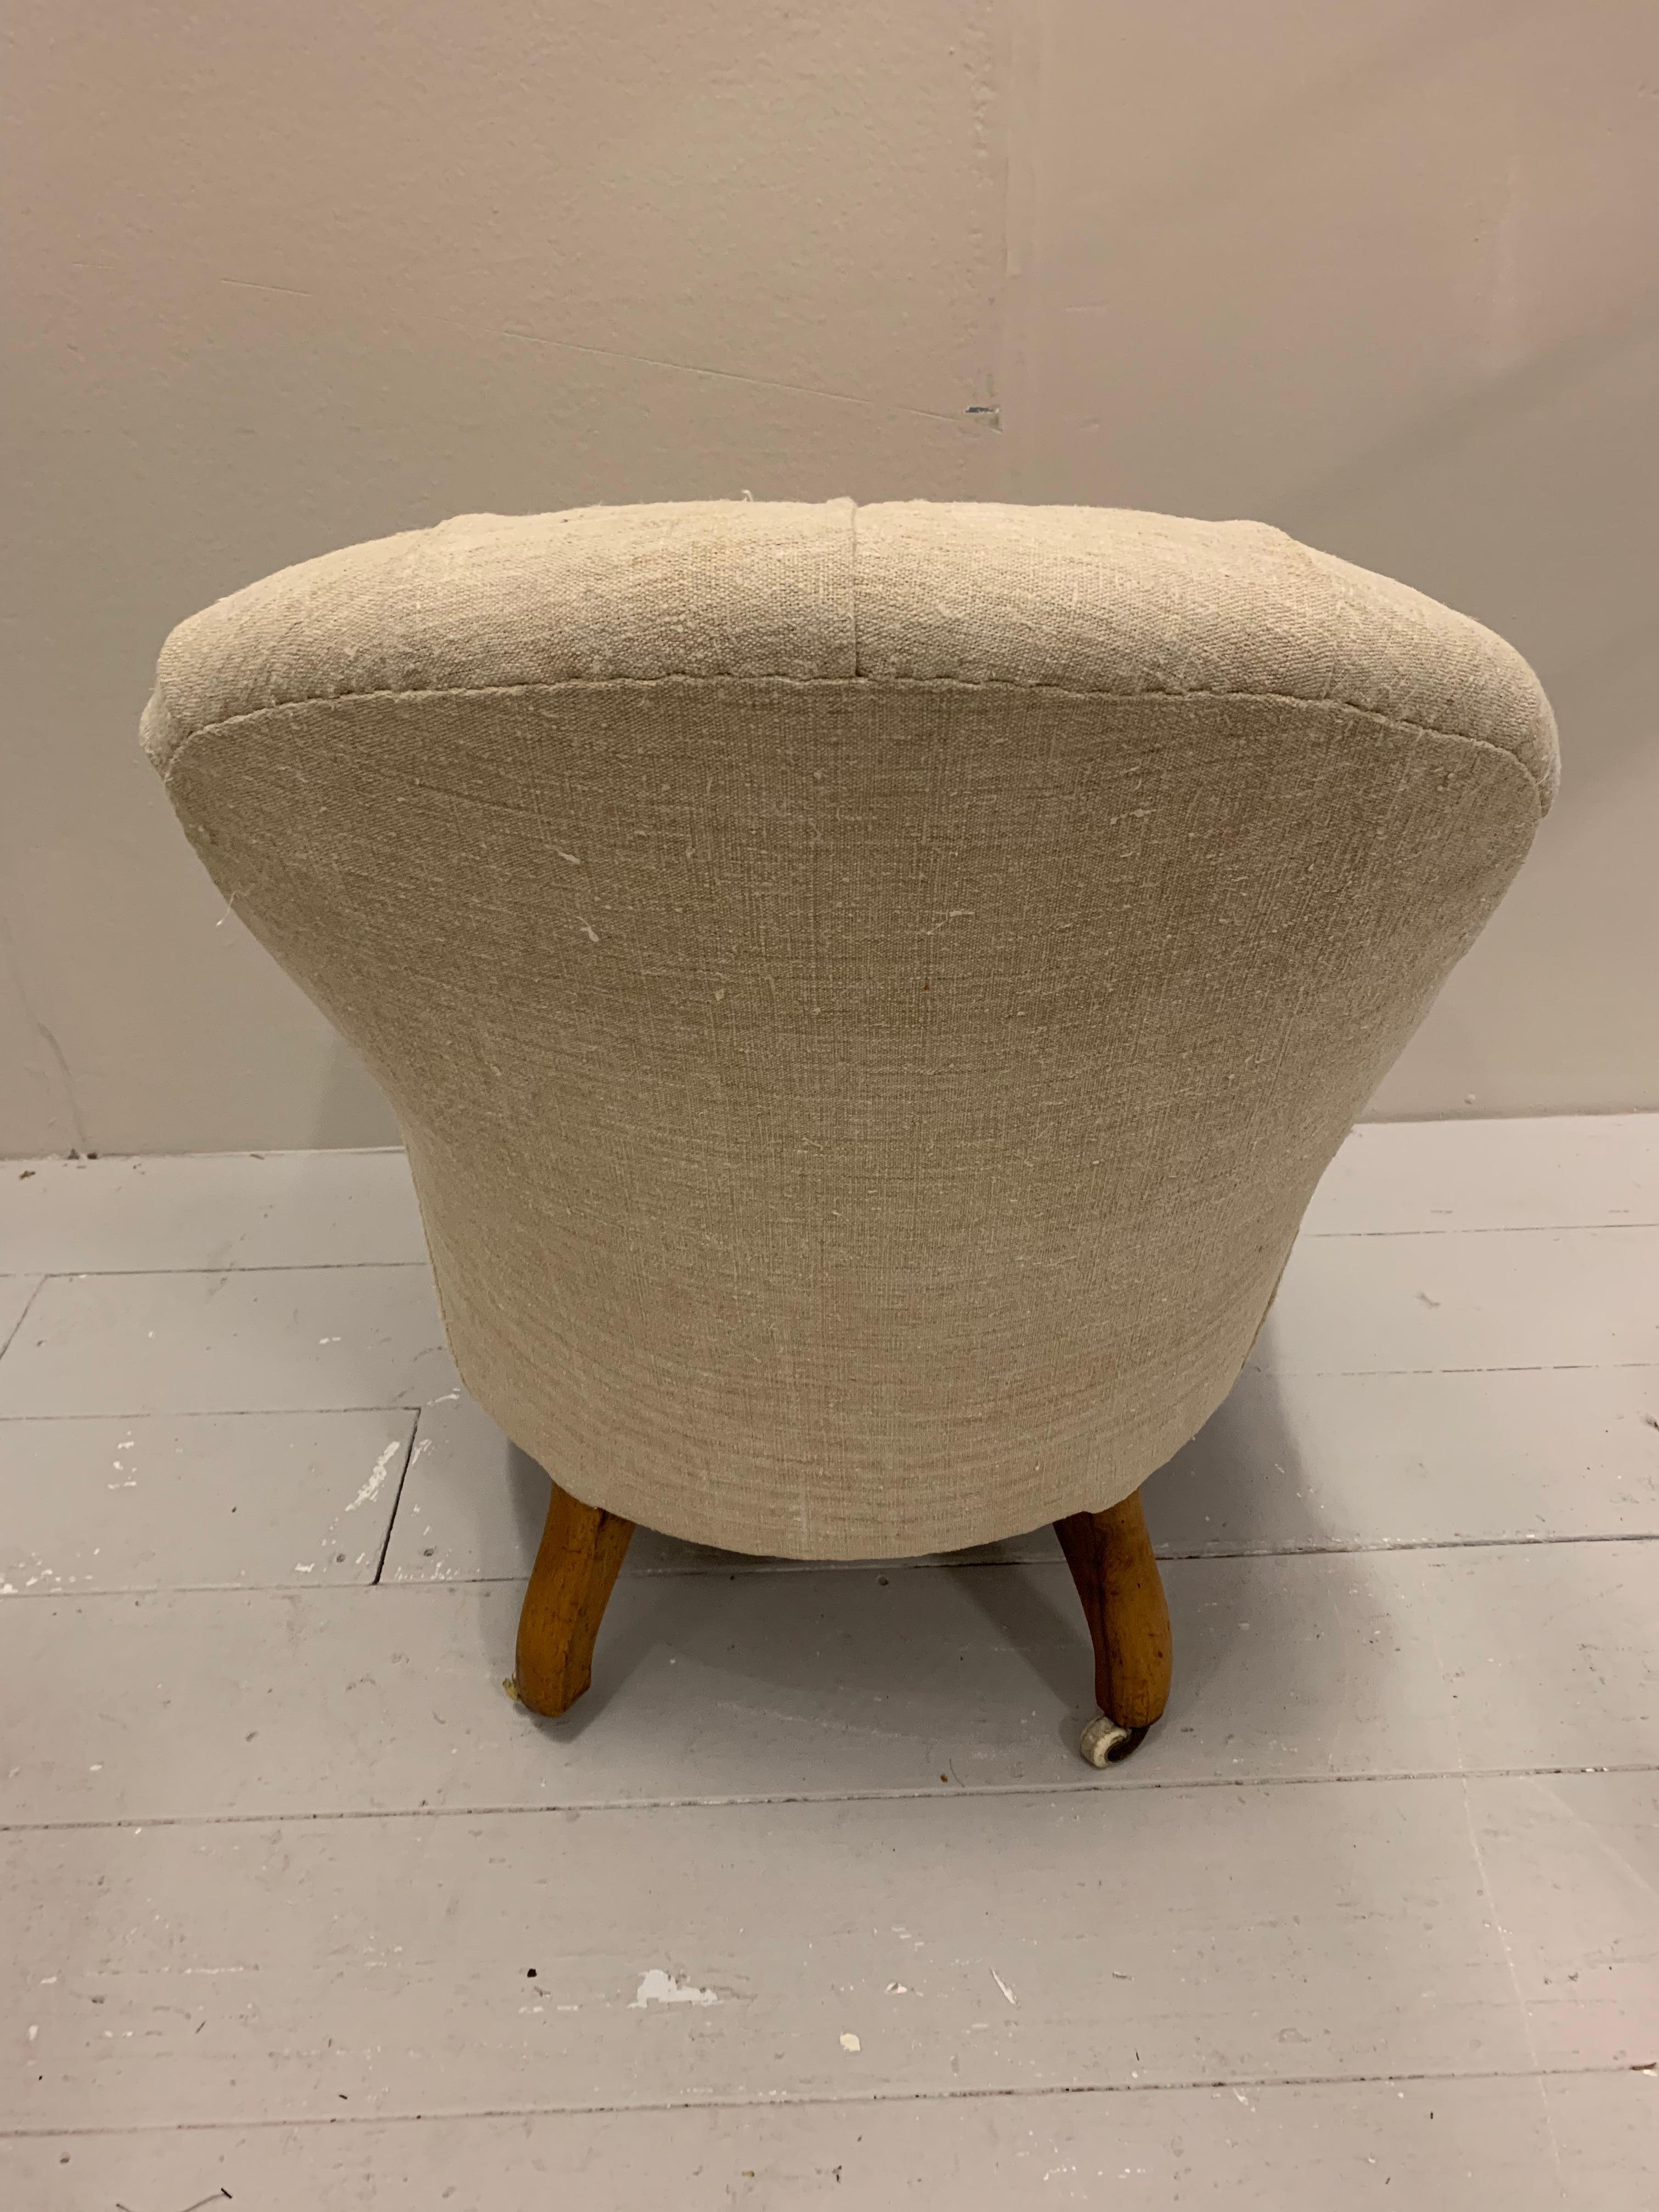 Circa 19th century upholstered English armchair with turned legs and ceramic castors.
This understated buttoned back armchair has been upholstered in a slightly coarse off white vintage french linen.
Great as a fireside, bedroom or reading chair, it